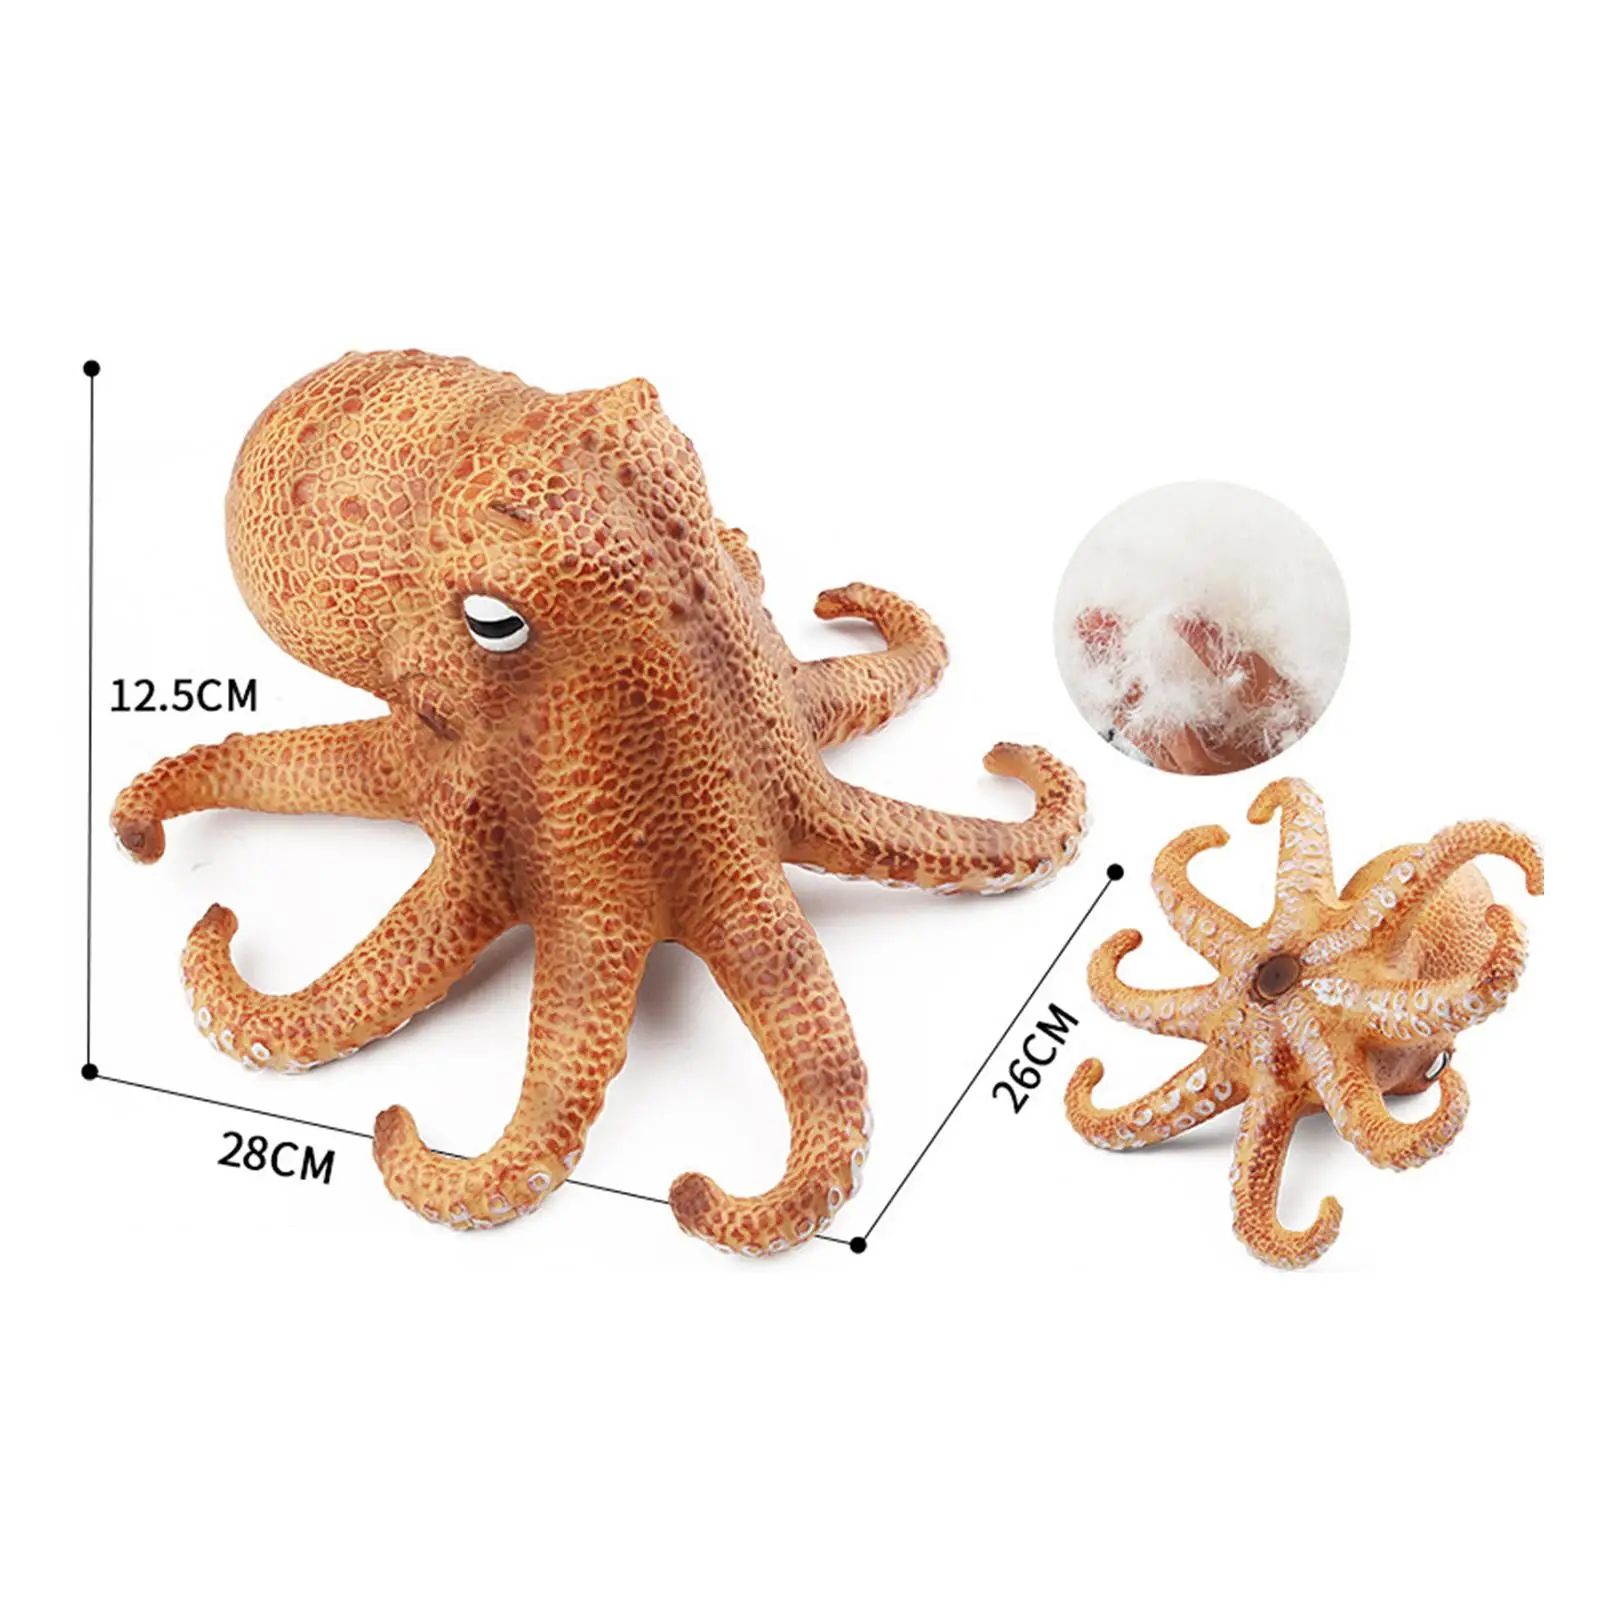 Animal Model Figures Giant Figurine Stuffed Toy for Kids Toy Educational Toys Home Ornament